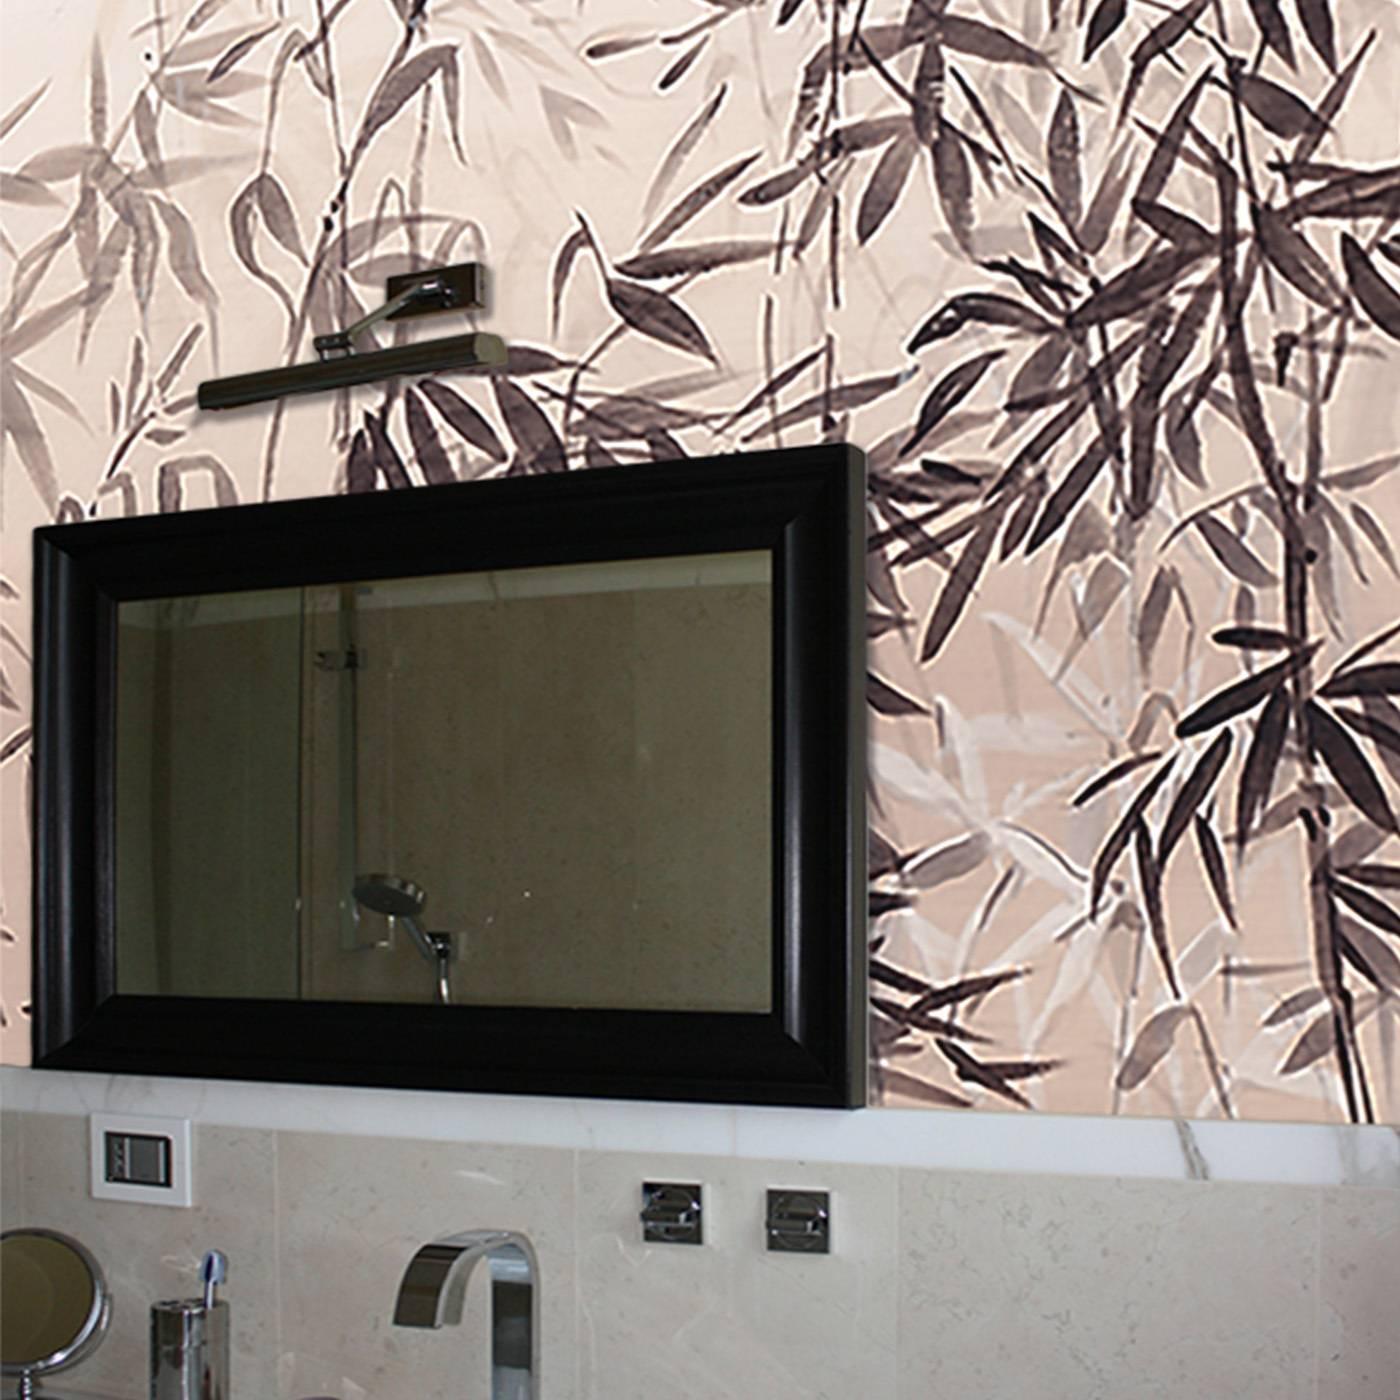 This exquisite wallpaper was entirely painted by hand using the freehand technique, without the help of a drawn sketch underneath. Its light design depicting bamboo leaves and branches is elegant and highly decorative and particularly ideal to be